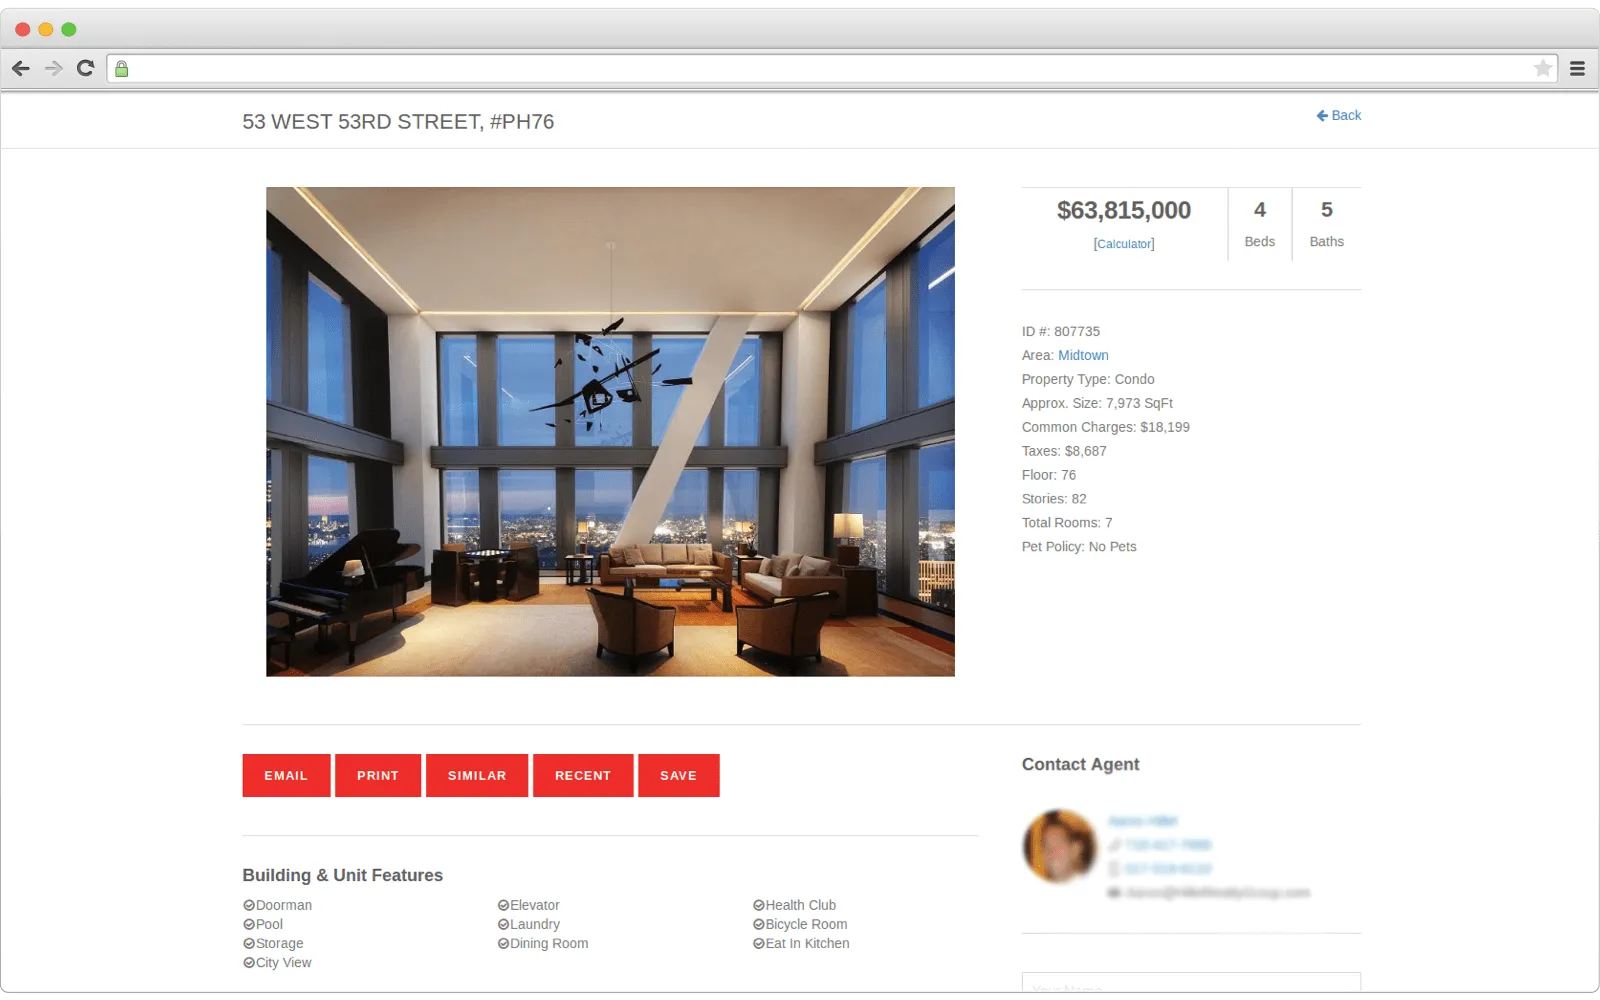 Example how listings on real estate websites may look